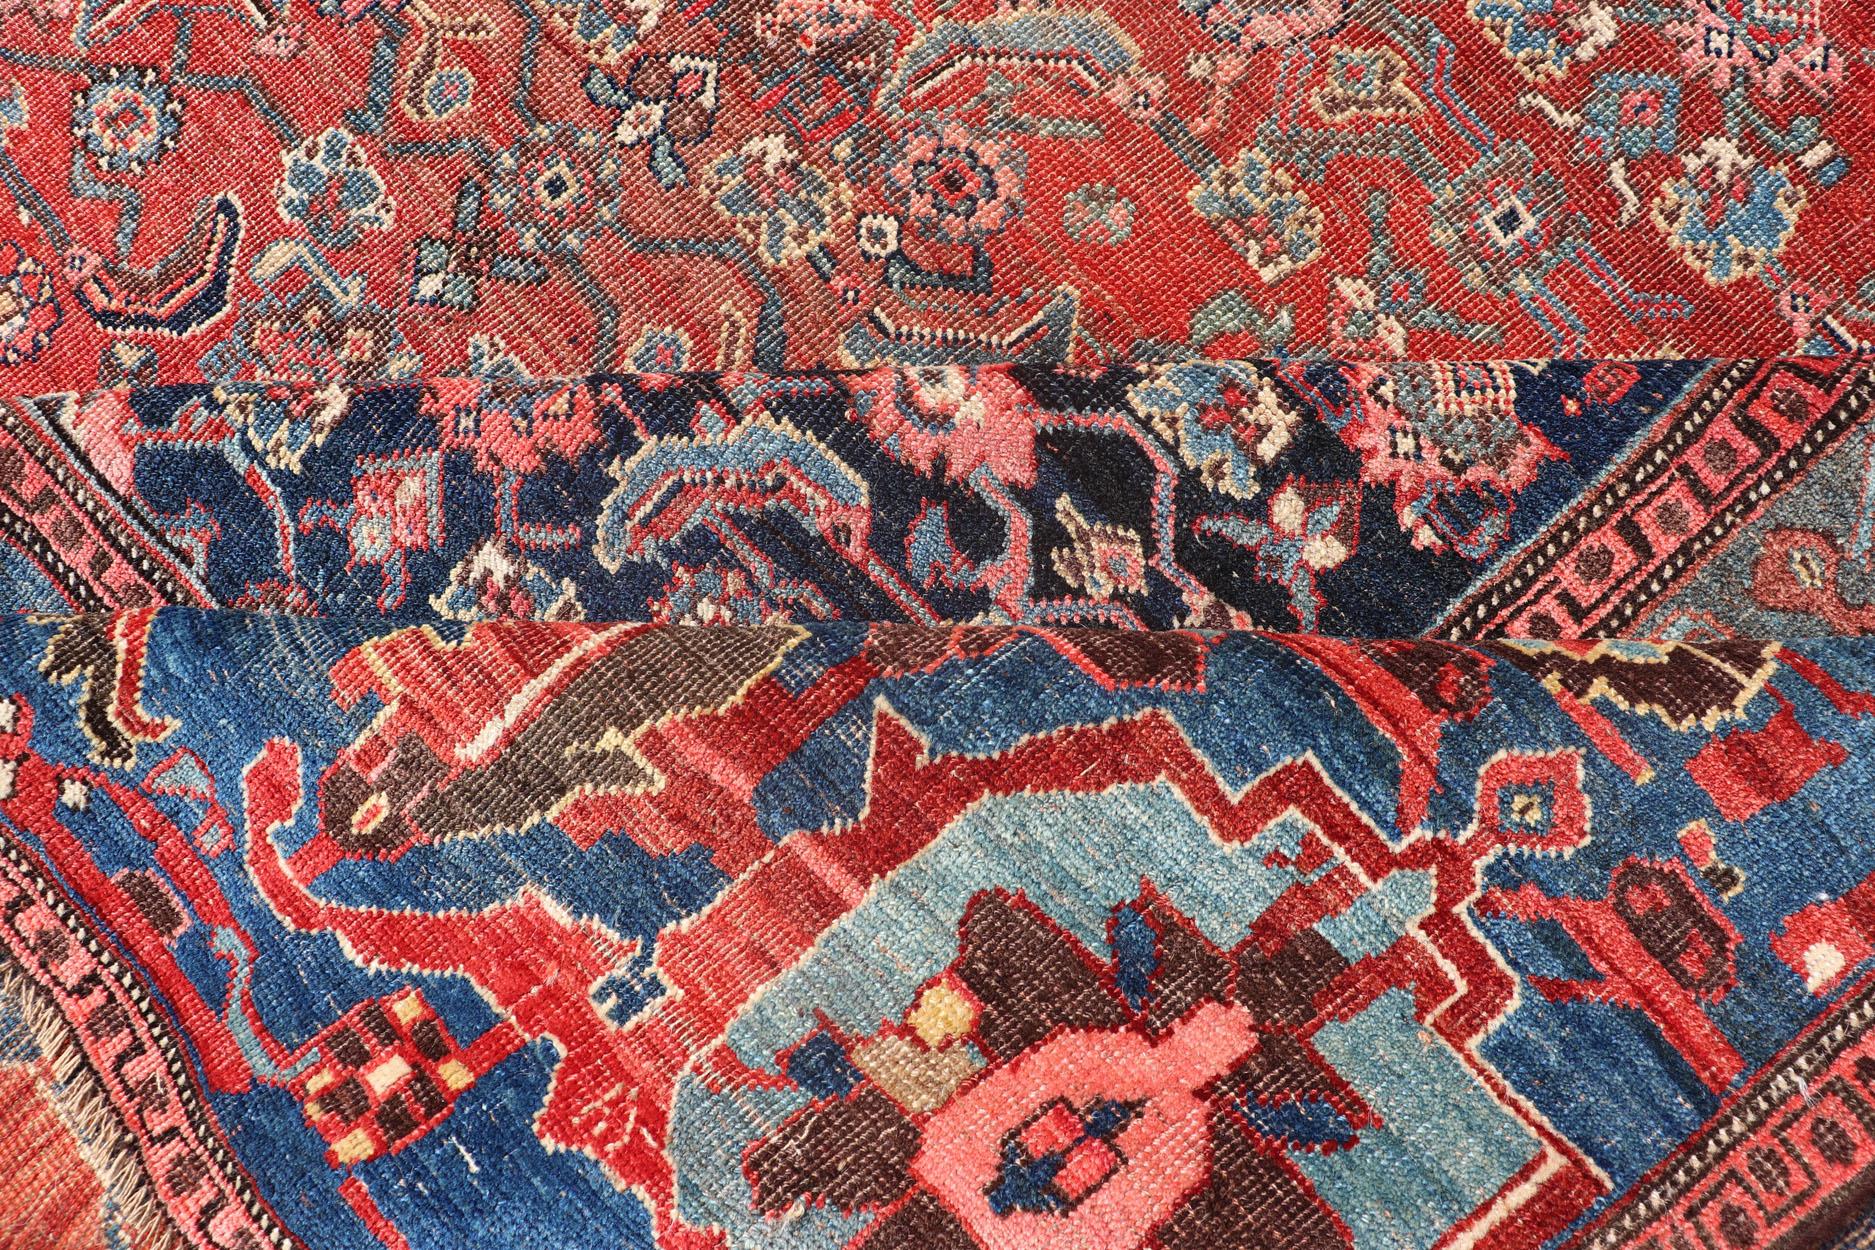 Very Large Antique Persian Bidjar Rug in Multi Shades of Blue, Tera-Cotta & Red For Sale 10